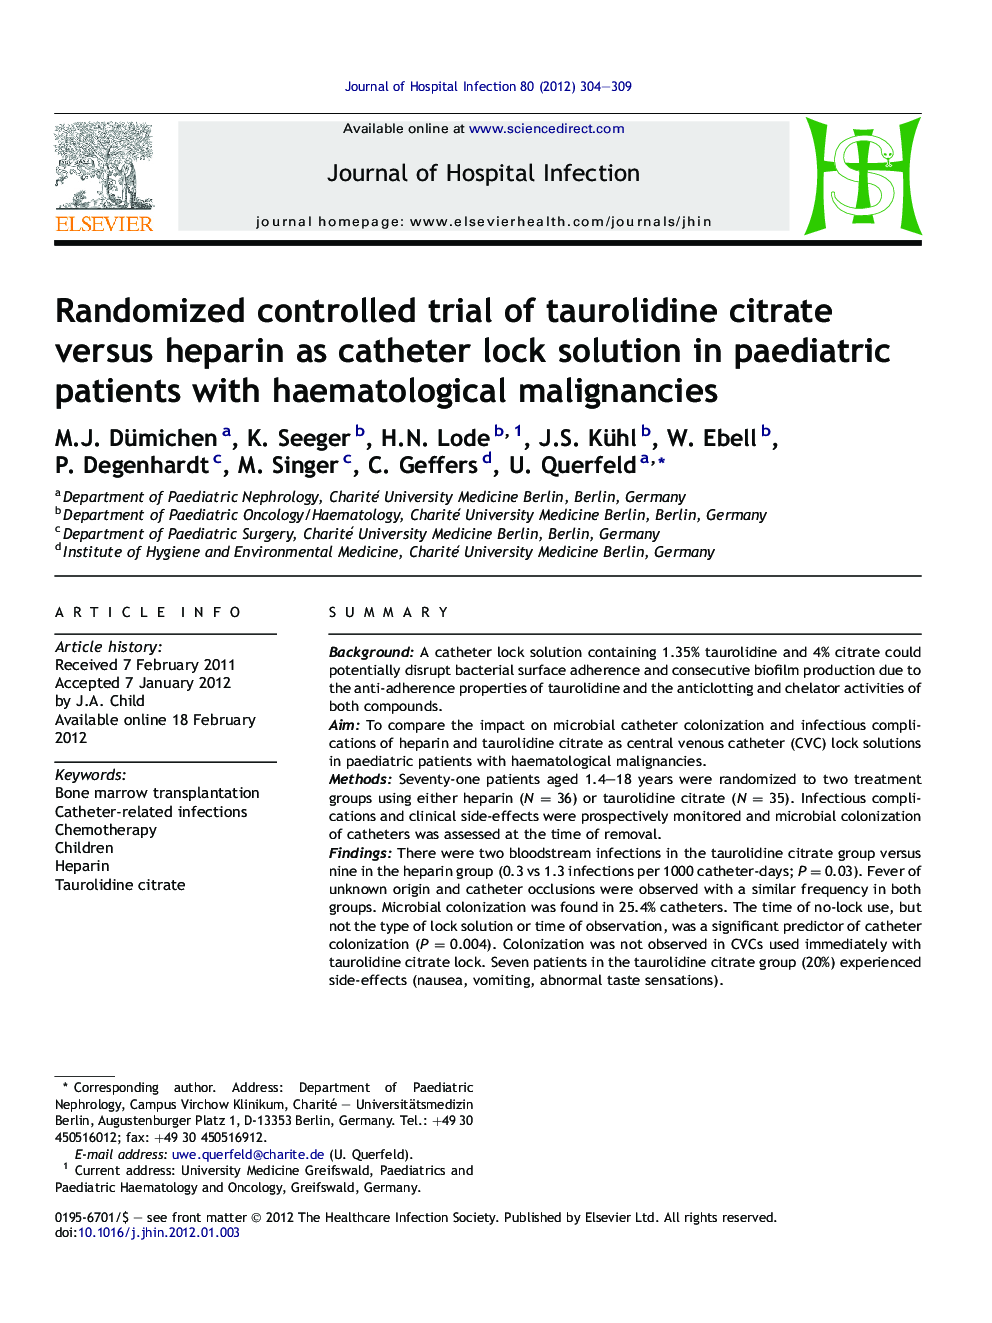 Randomized controlled trial of taurolidine citrate versus heparin as catheter lock solution in paediatric patients with haematological malignancies